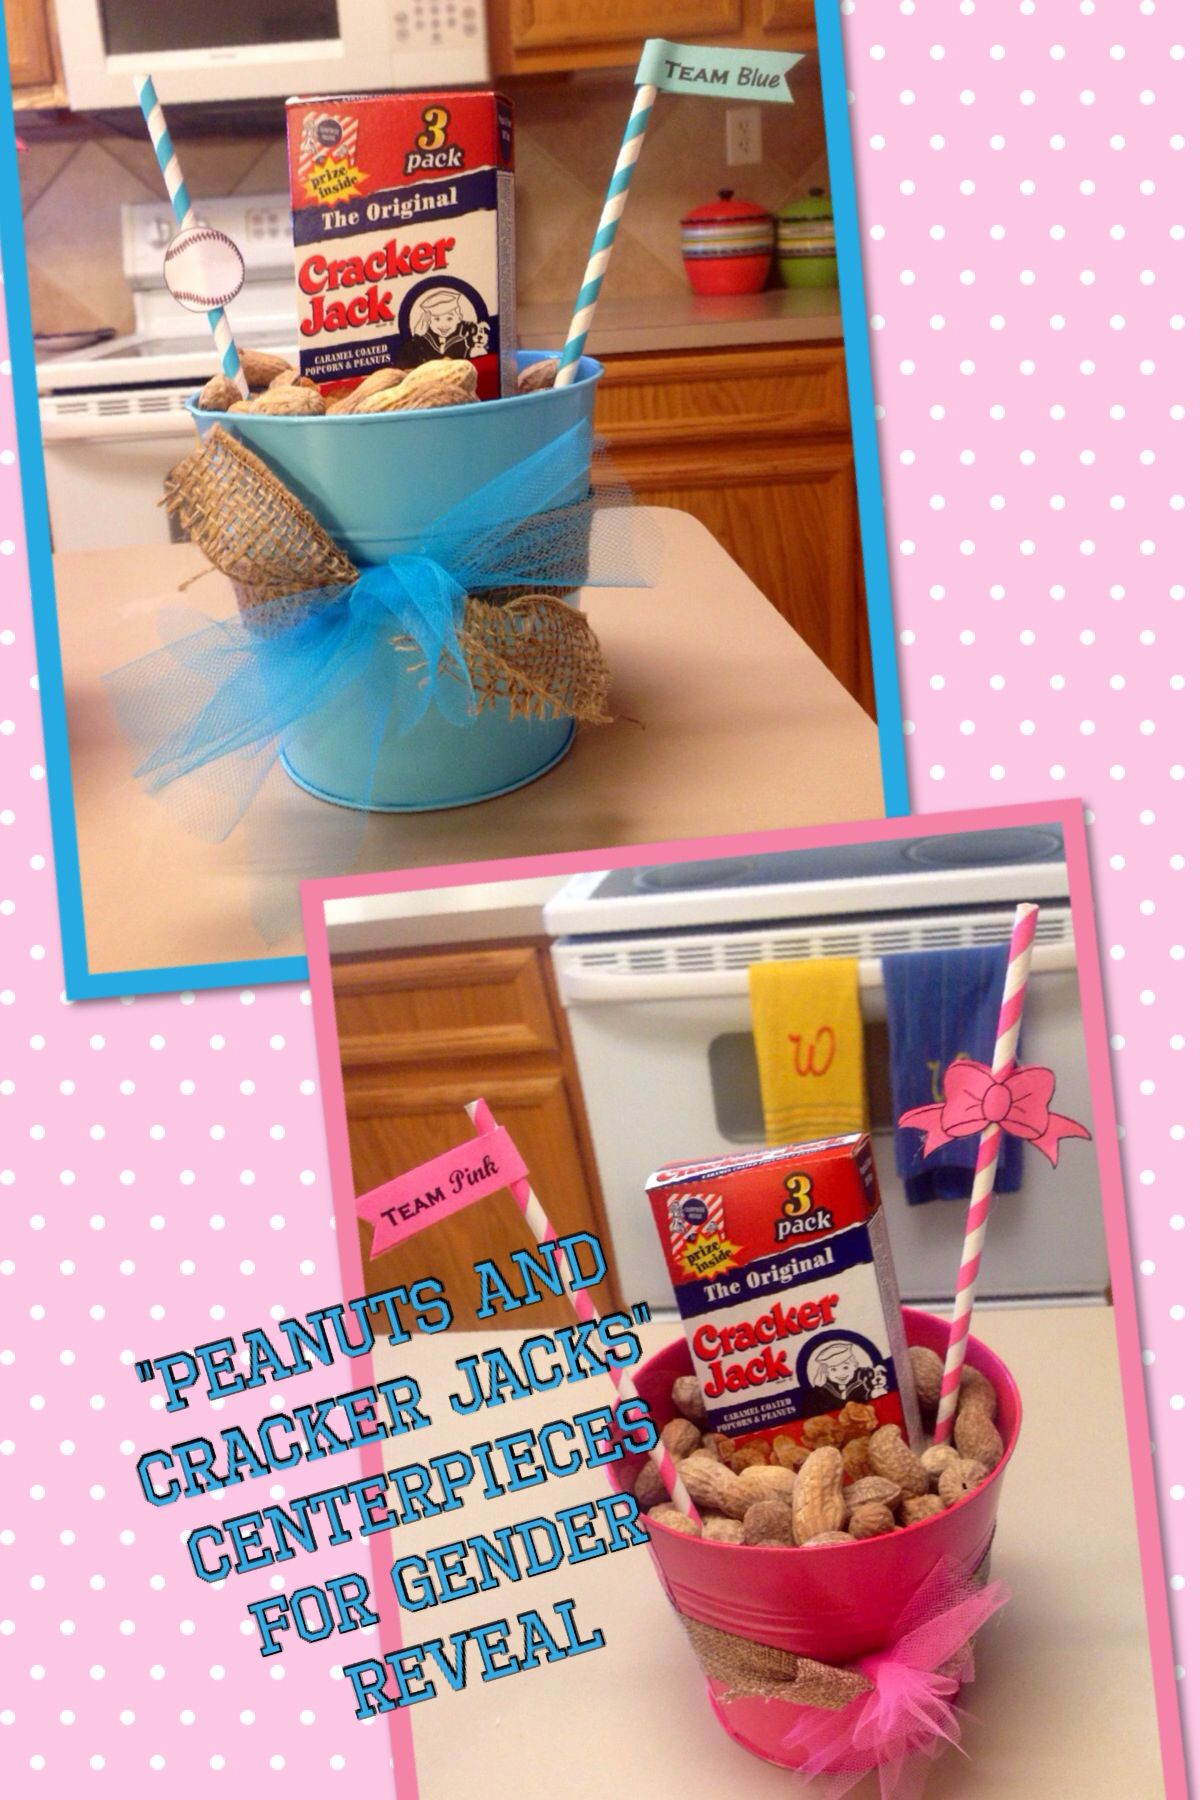 Baseball Gender Reveal Party Ideas
 "Peanuts or Cracker Jacks" Centerpieces for our "Baseball